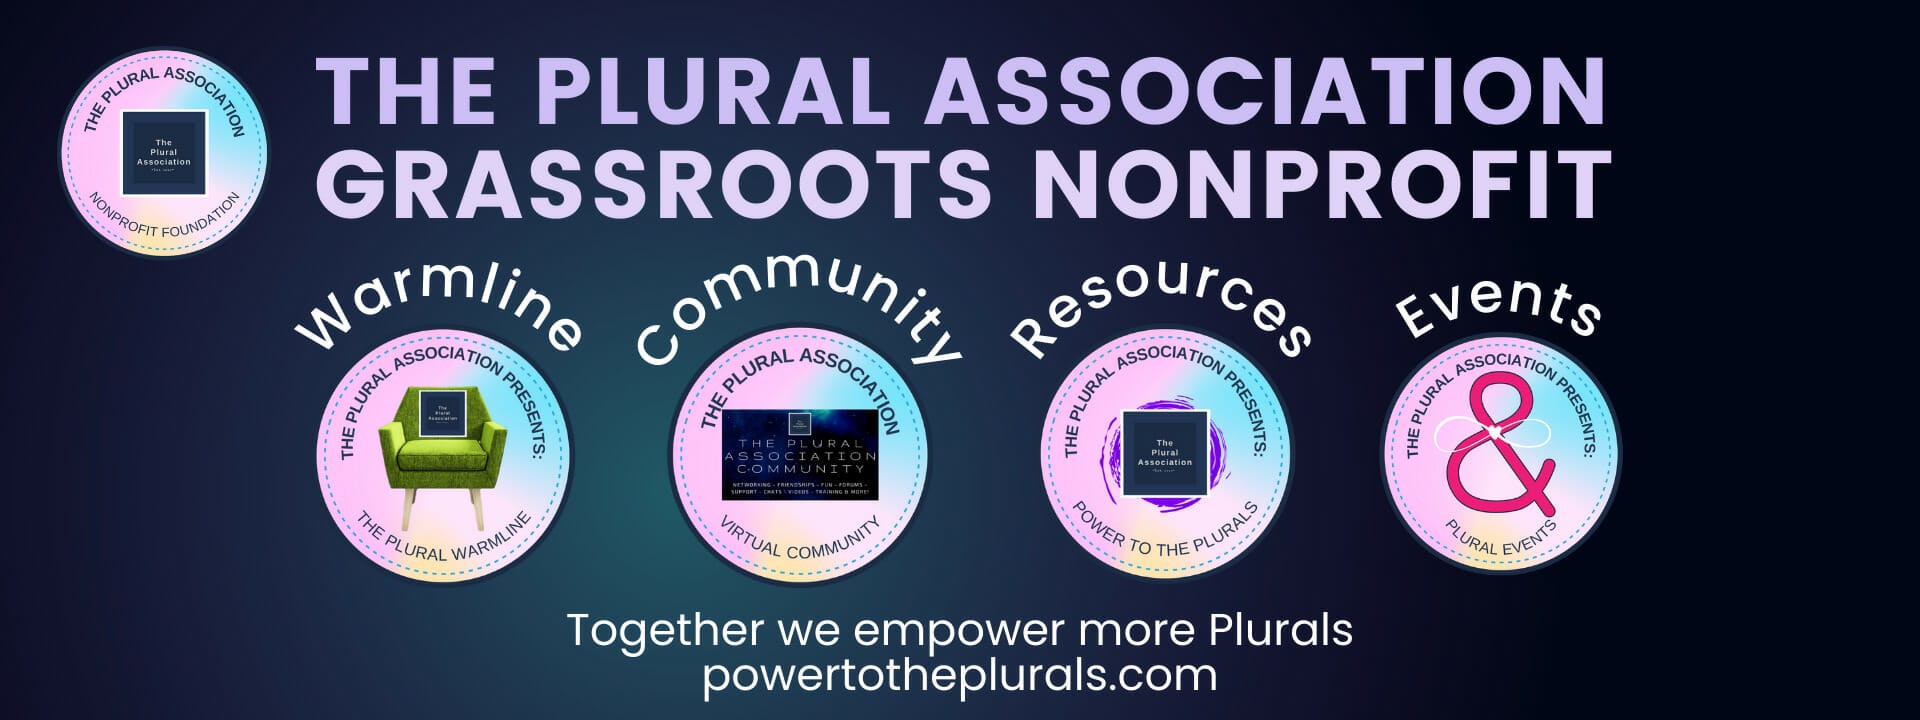 The Plural Association Promo image. Showing logo's of The Plural Warmline. The all-inclusive private community, power to the plurals resource website, and plural events